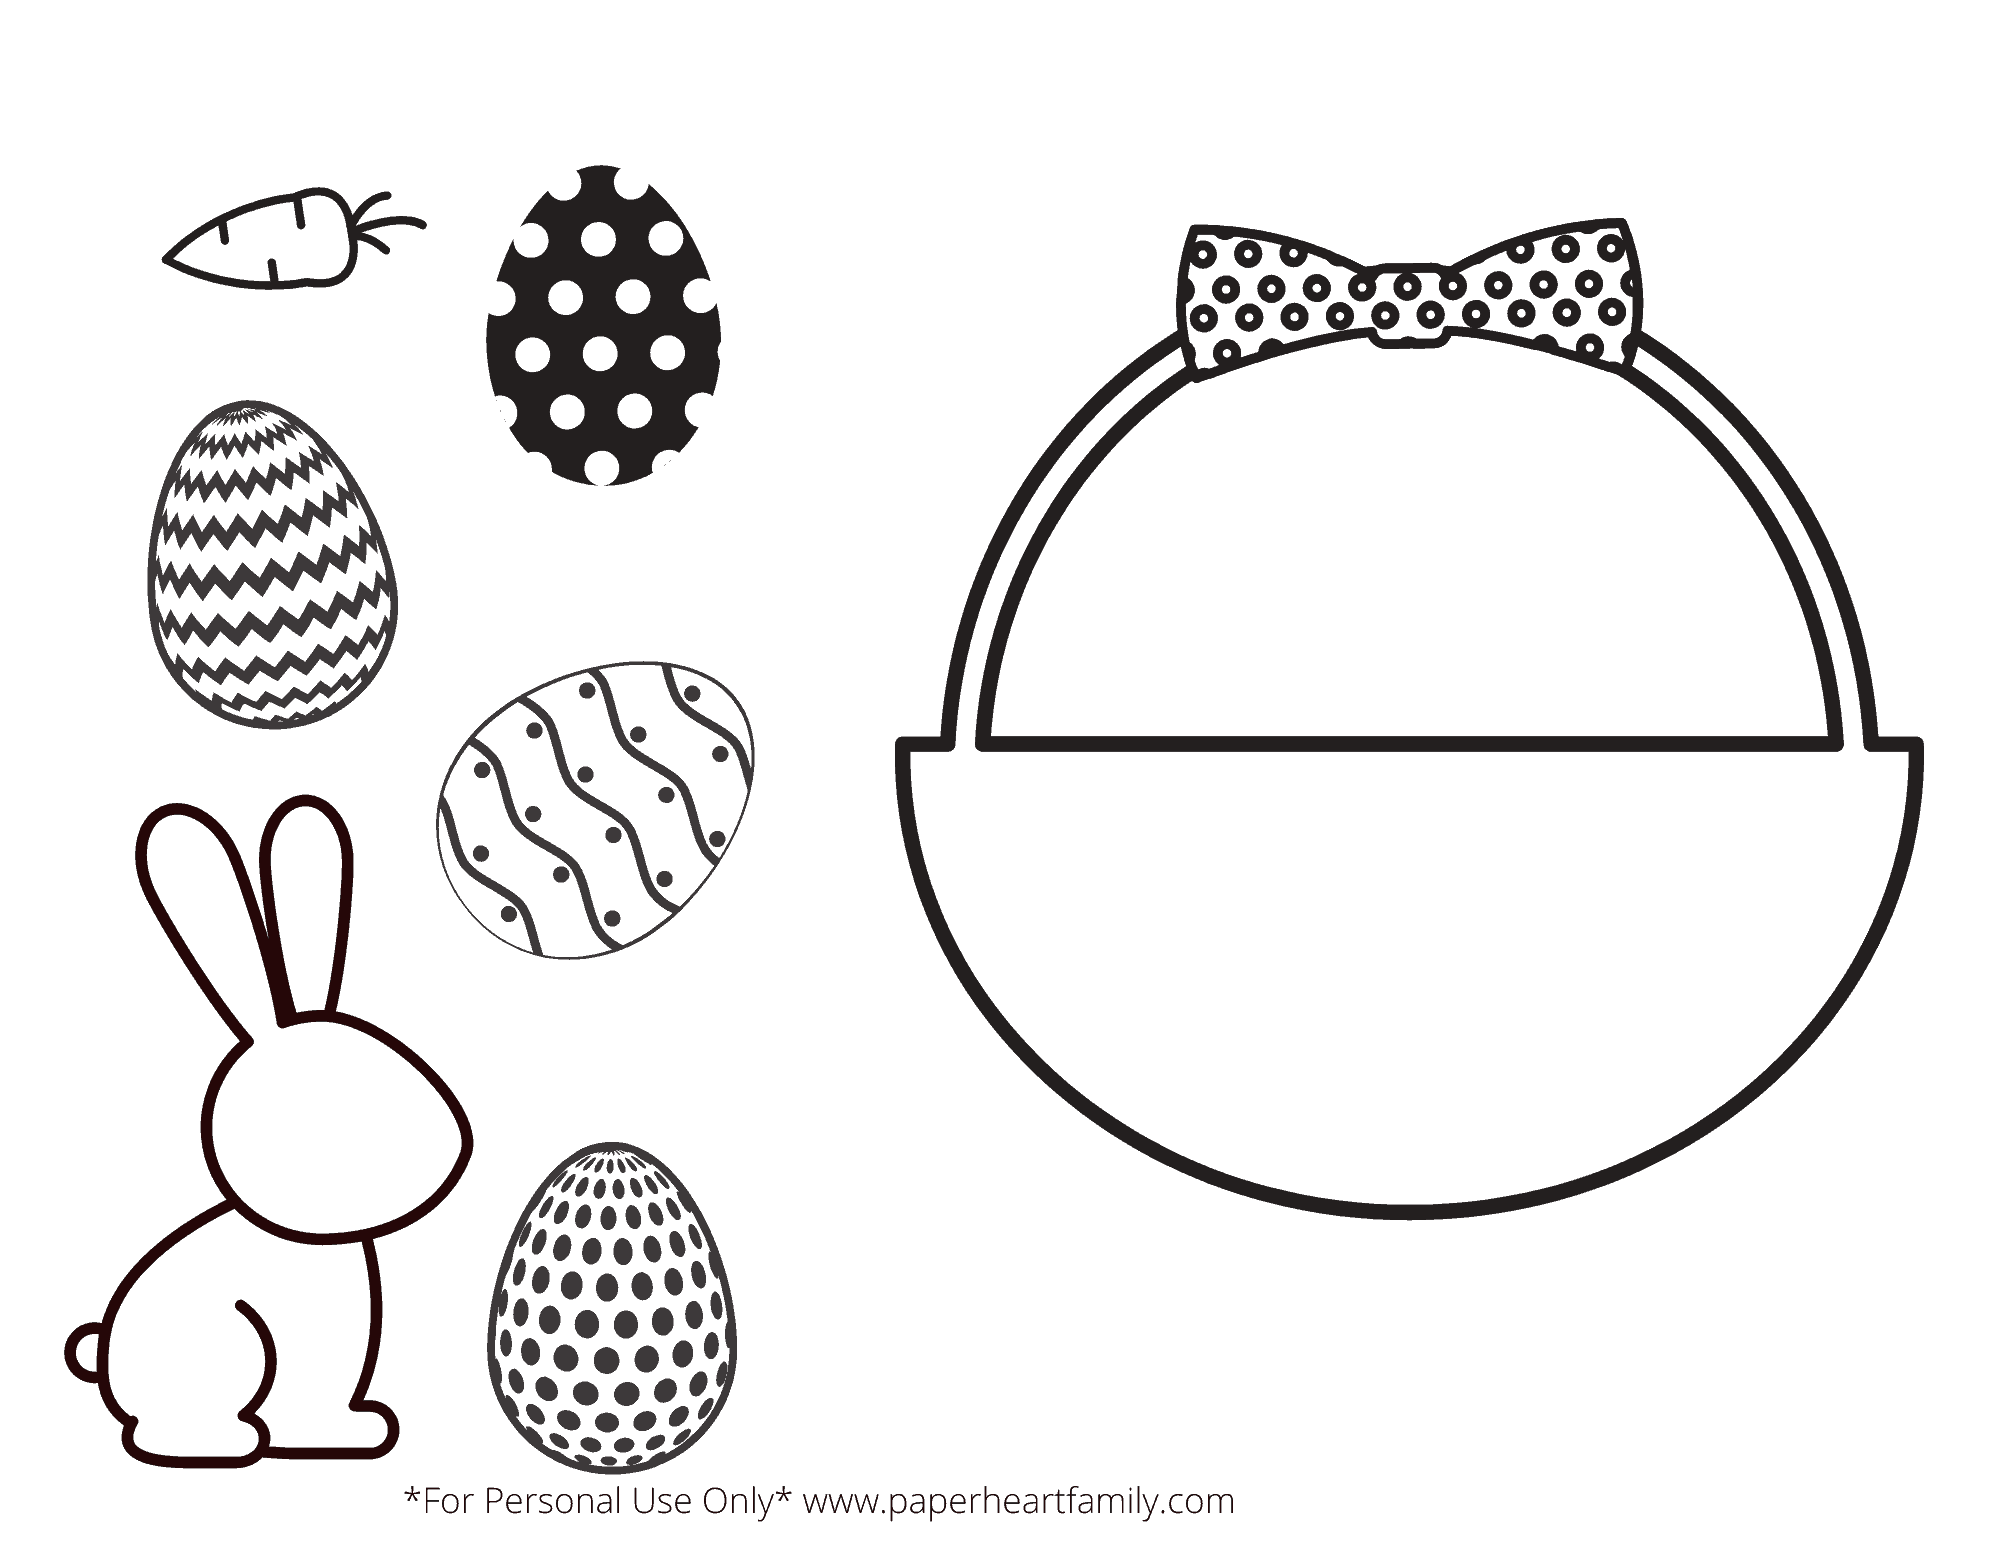 Free Printable Easter Craft For Kids (Simply Print, Cut, Color And Paste!)